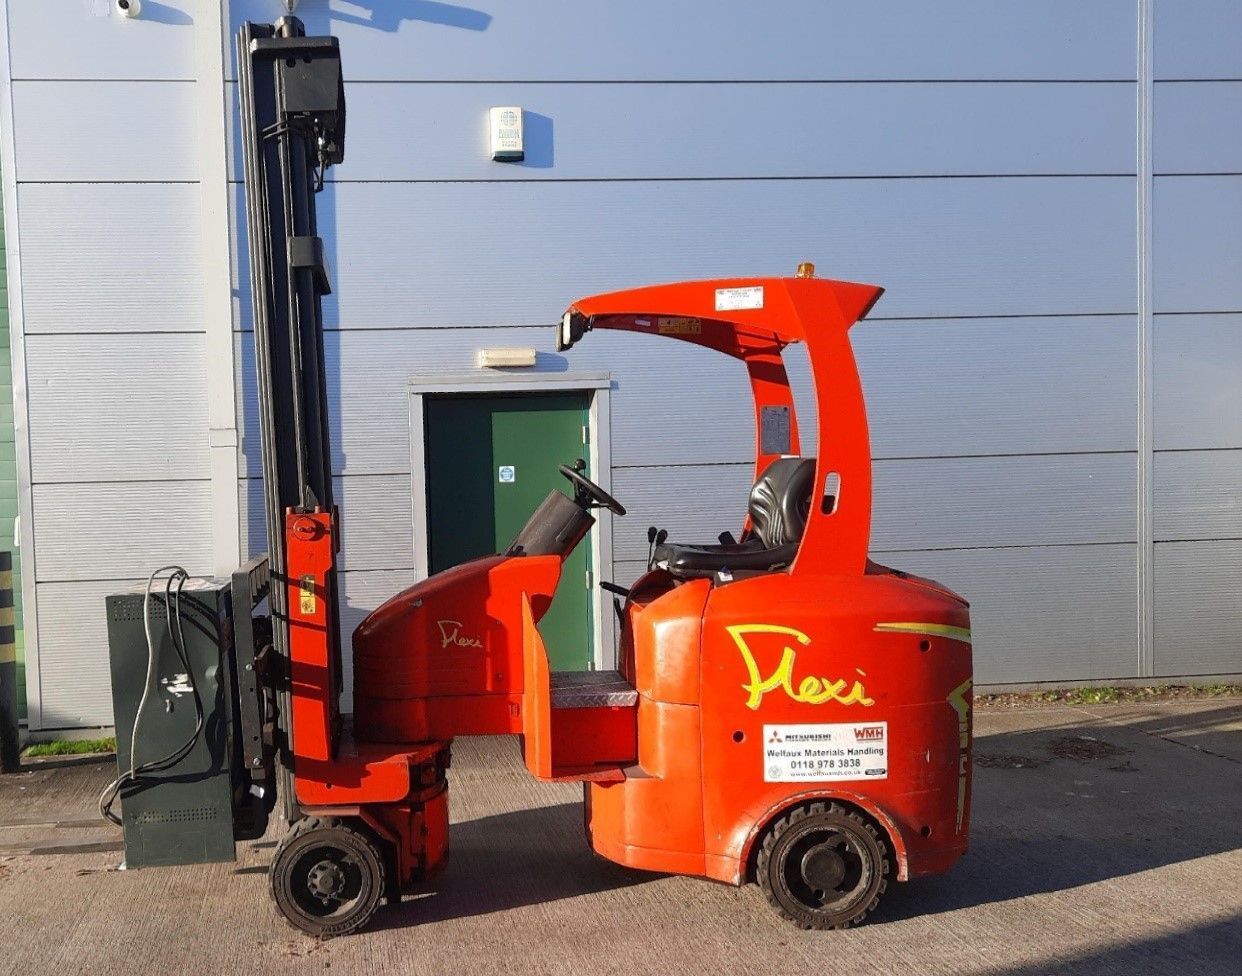 A red forklift is parked in front of a building